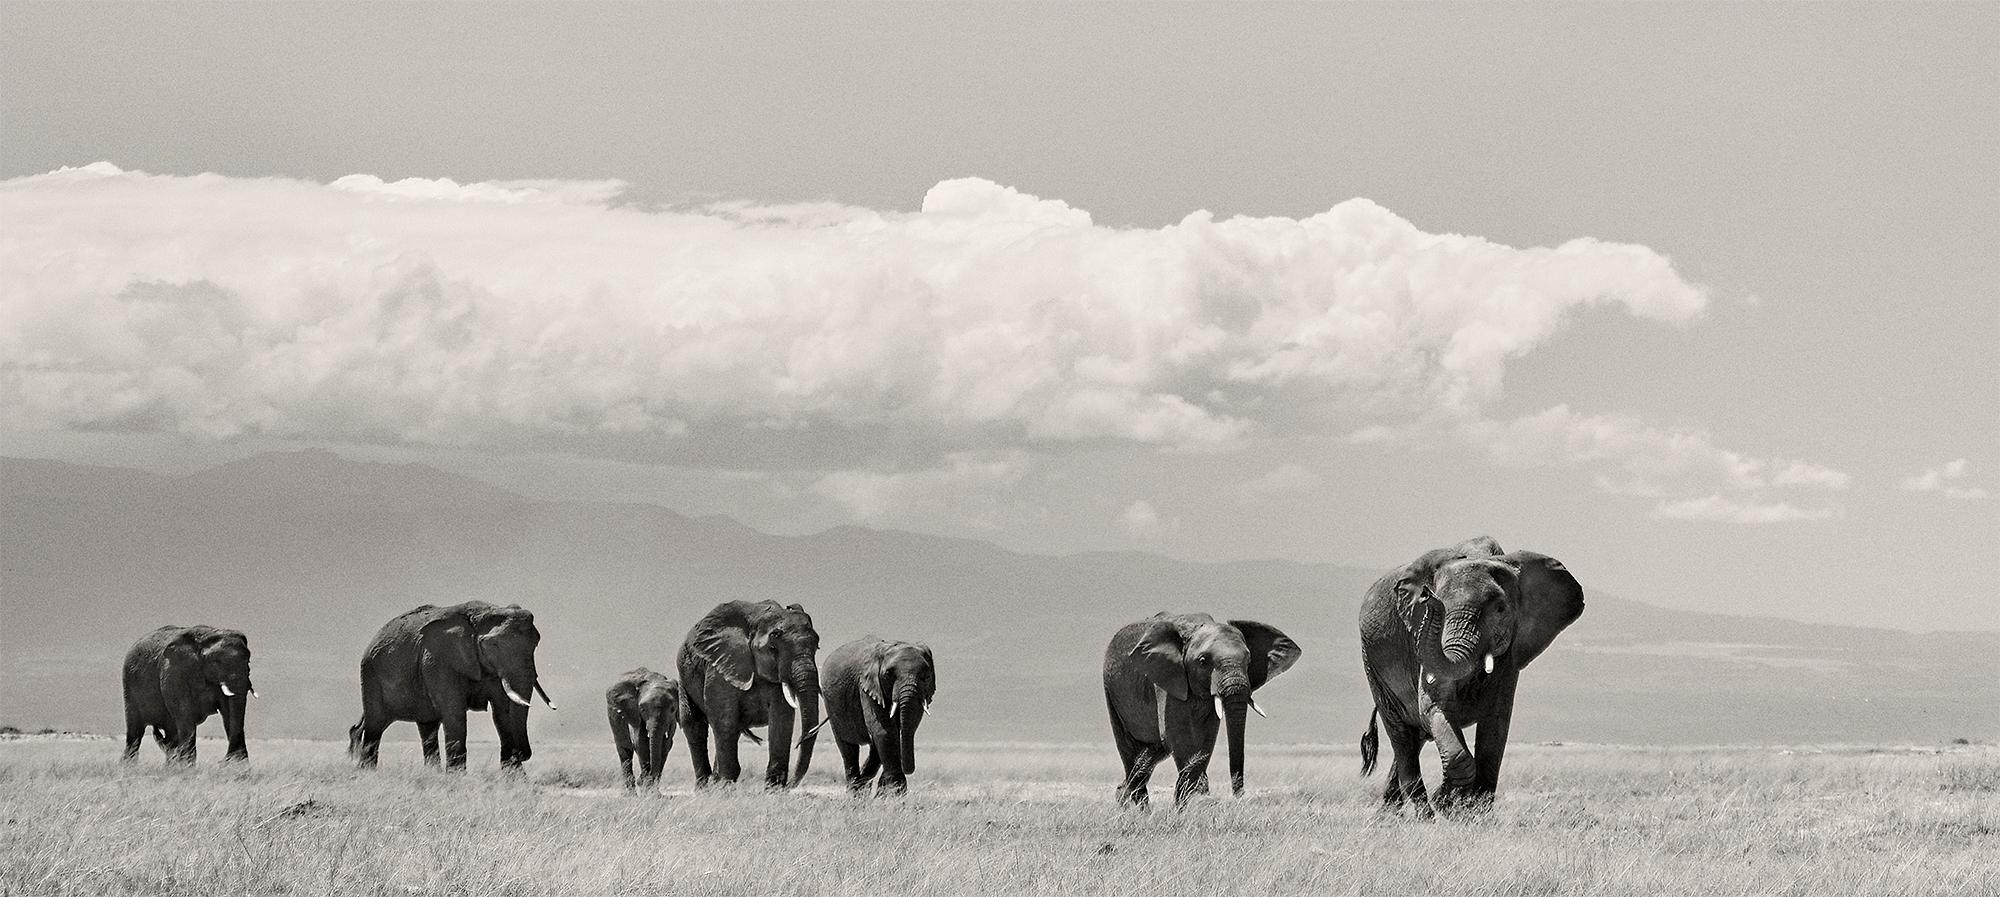 Edition 10

The Matriarch guides her elephant family to the waterhole in Amboseli Ecosystem.

​For years, Joachim Schmeisser has been photographing the last giants of Africa at close range, creating exceptionally intimate portraits of species